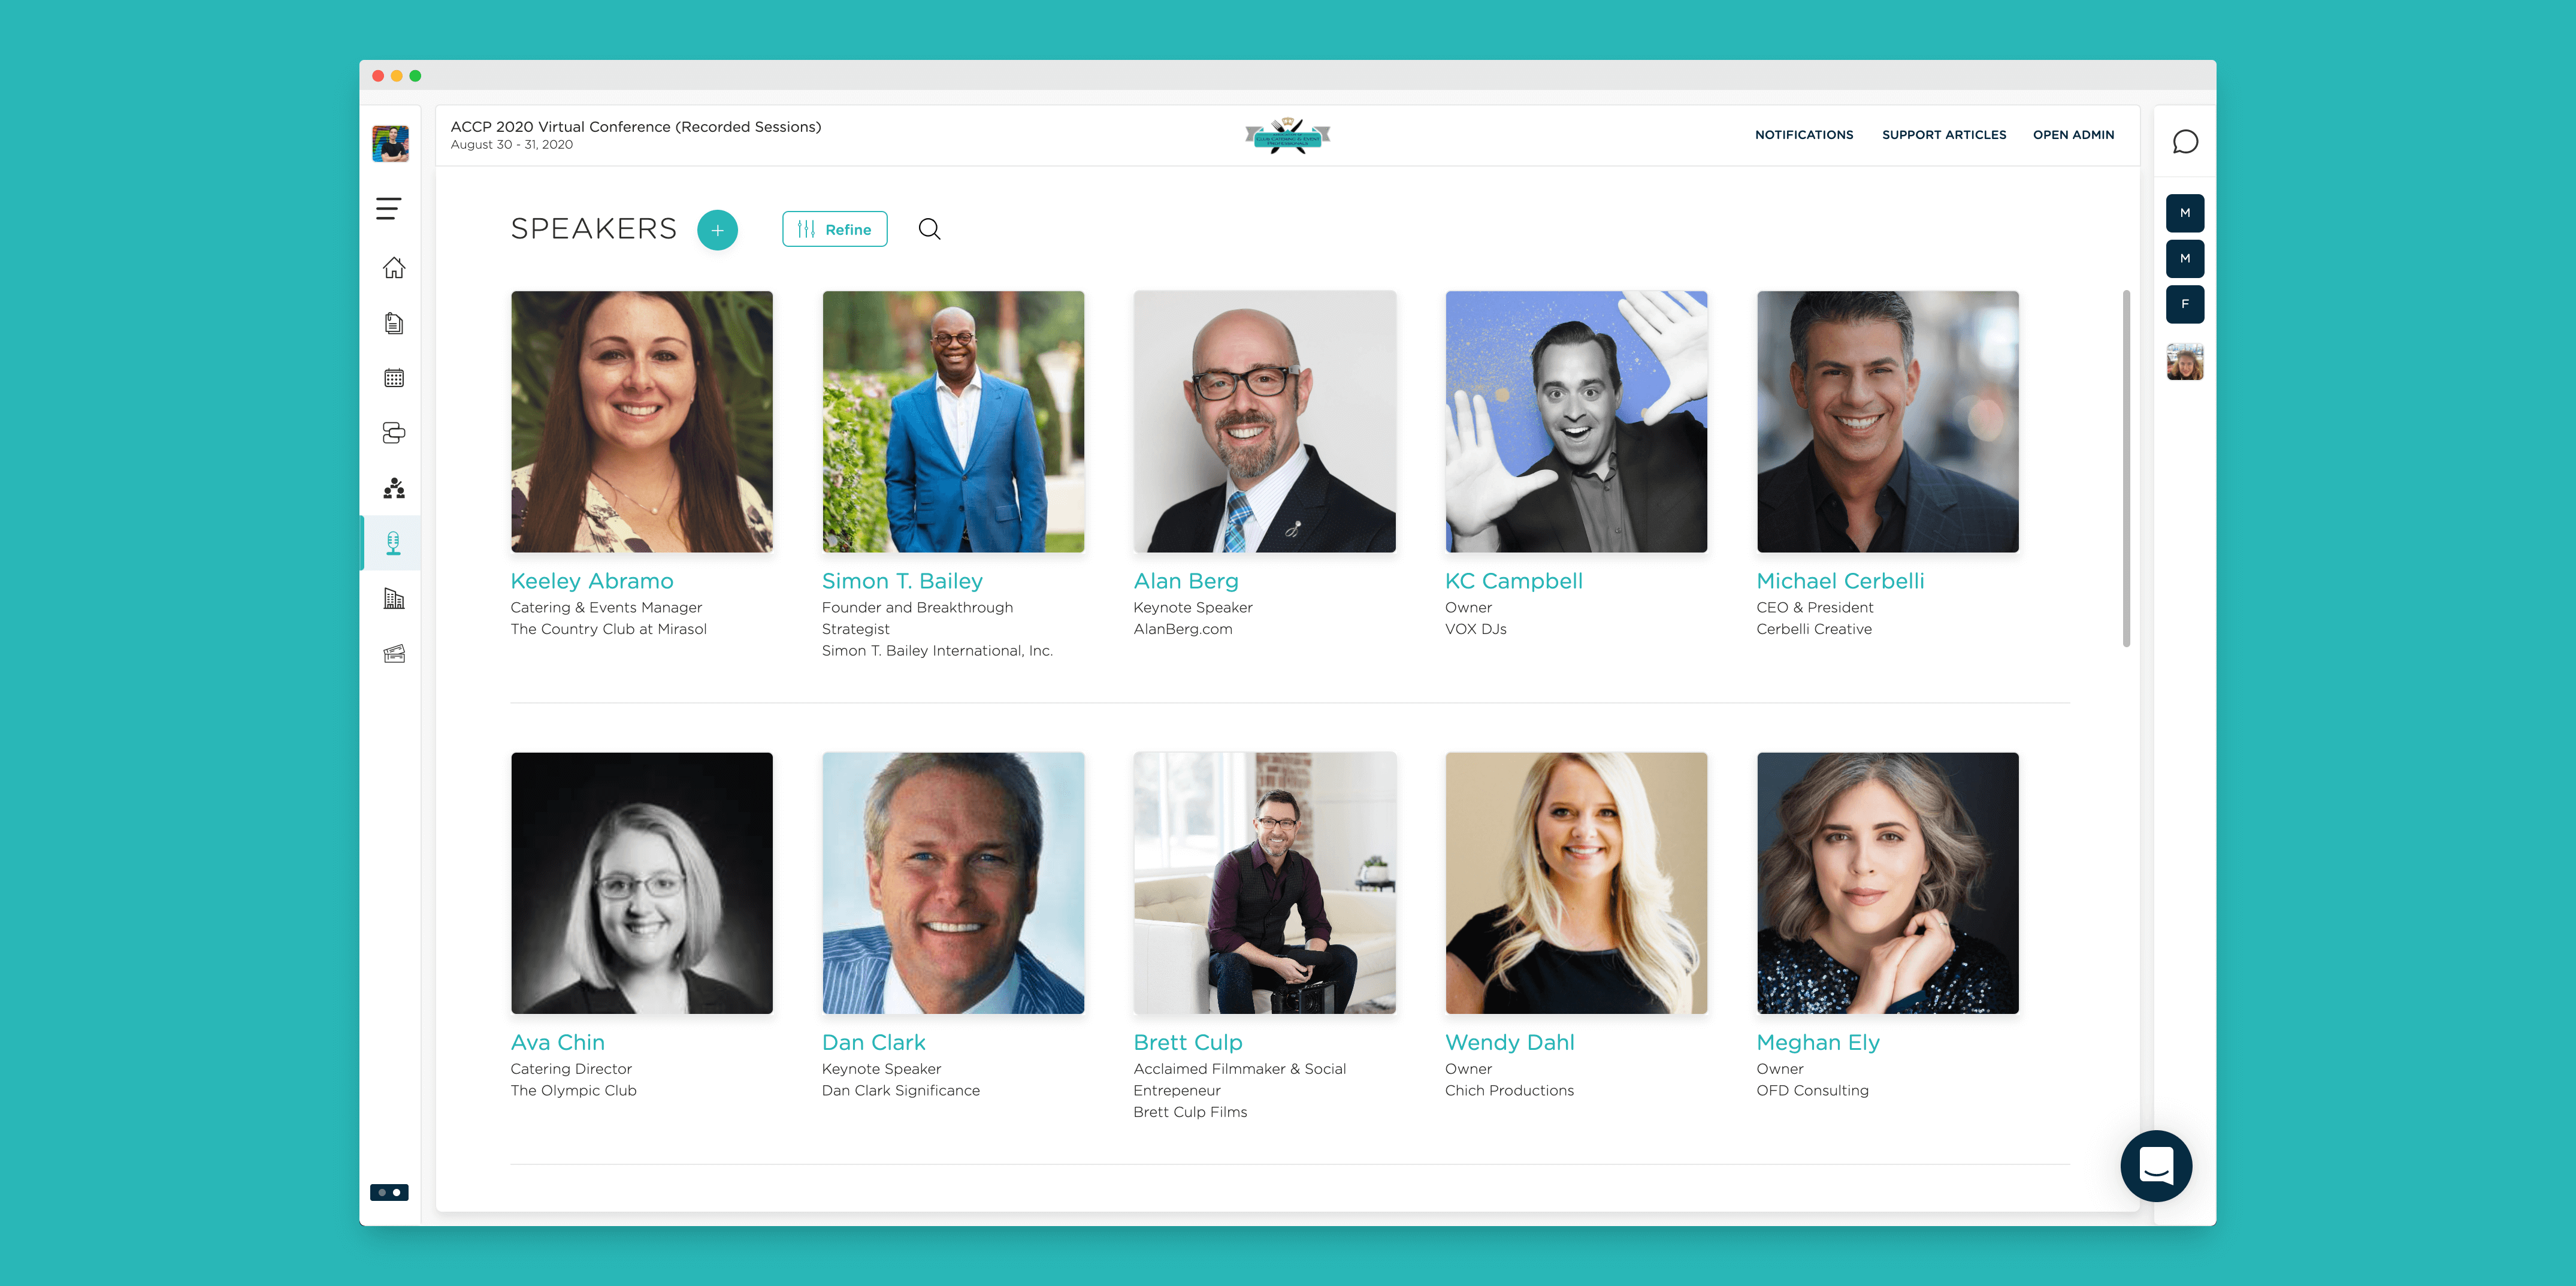 Profiles for Speakers & Attendees